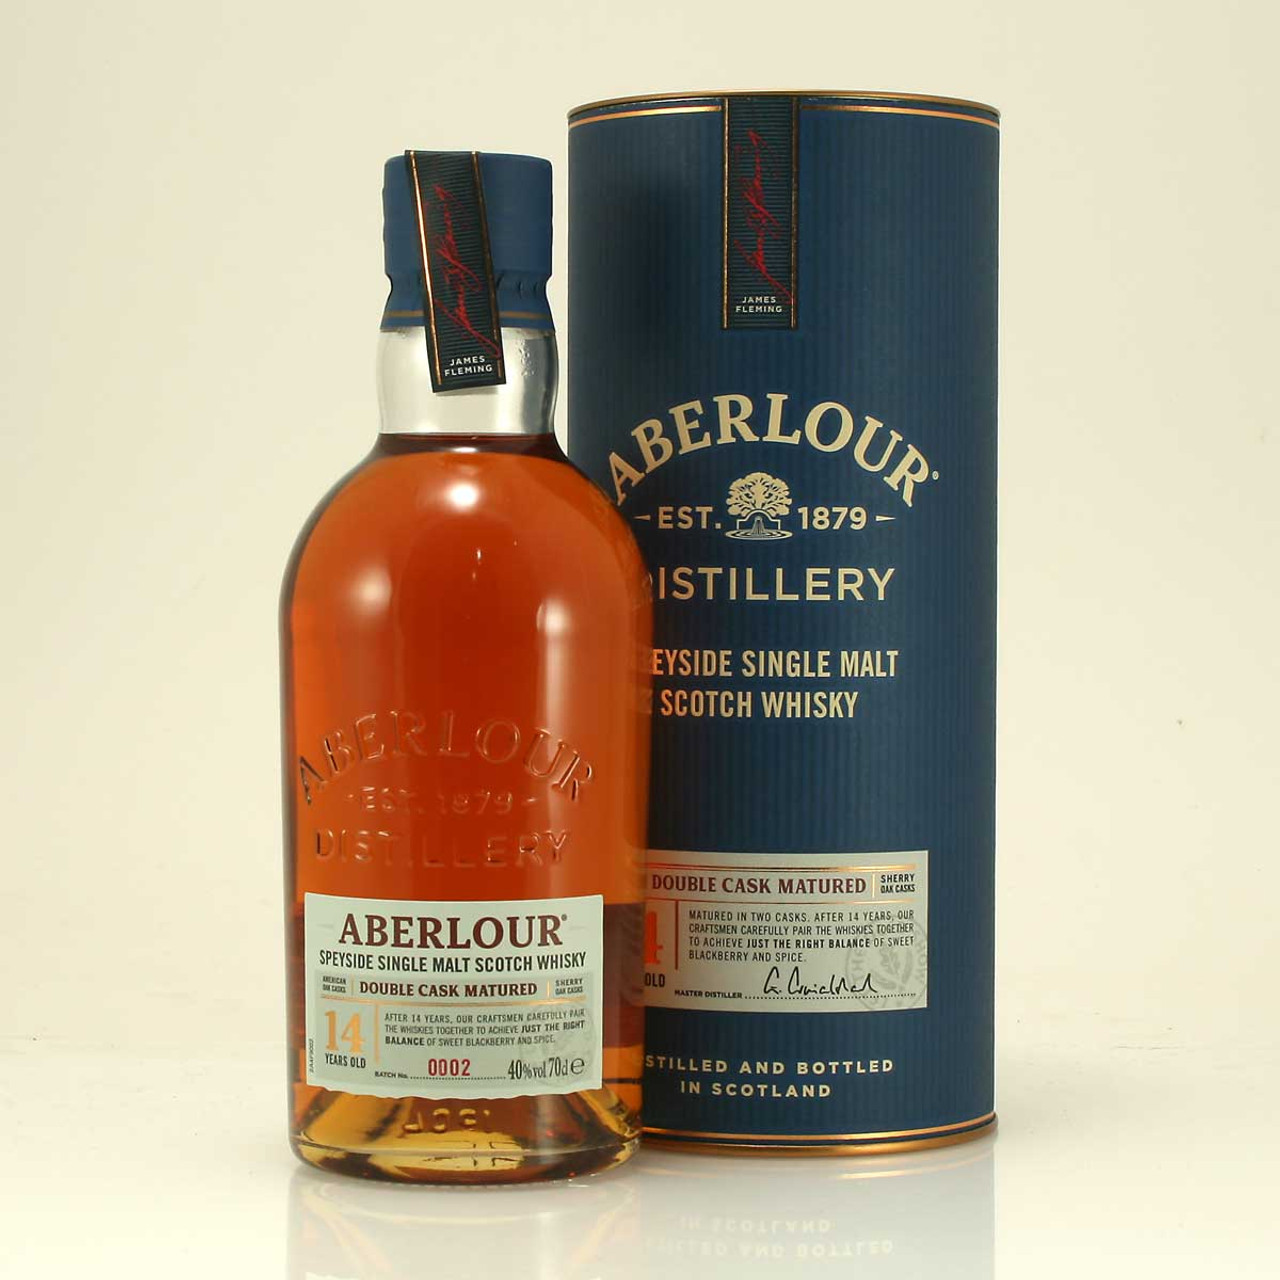 Speyside Whisky Aberlour 14, double cask matured